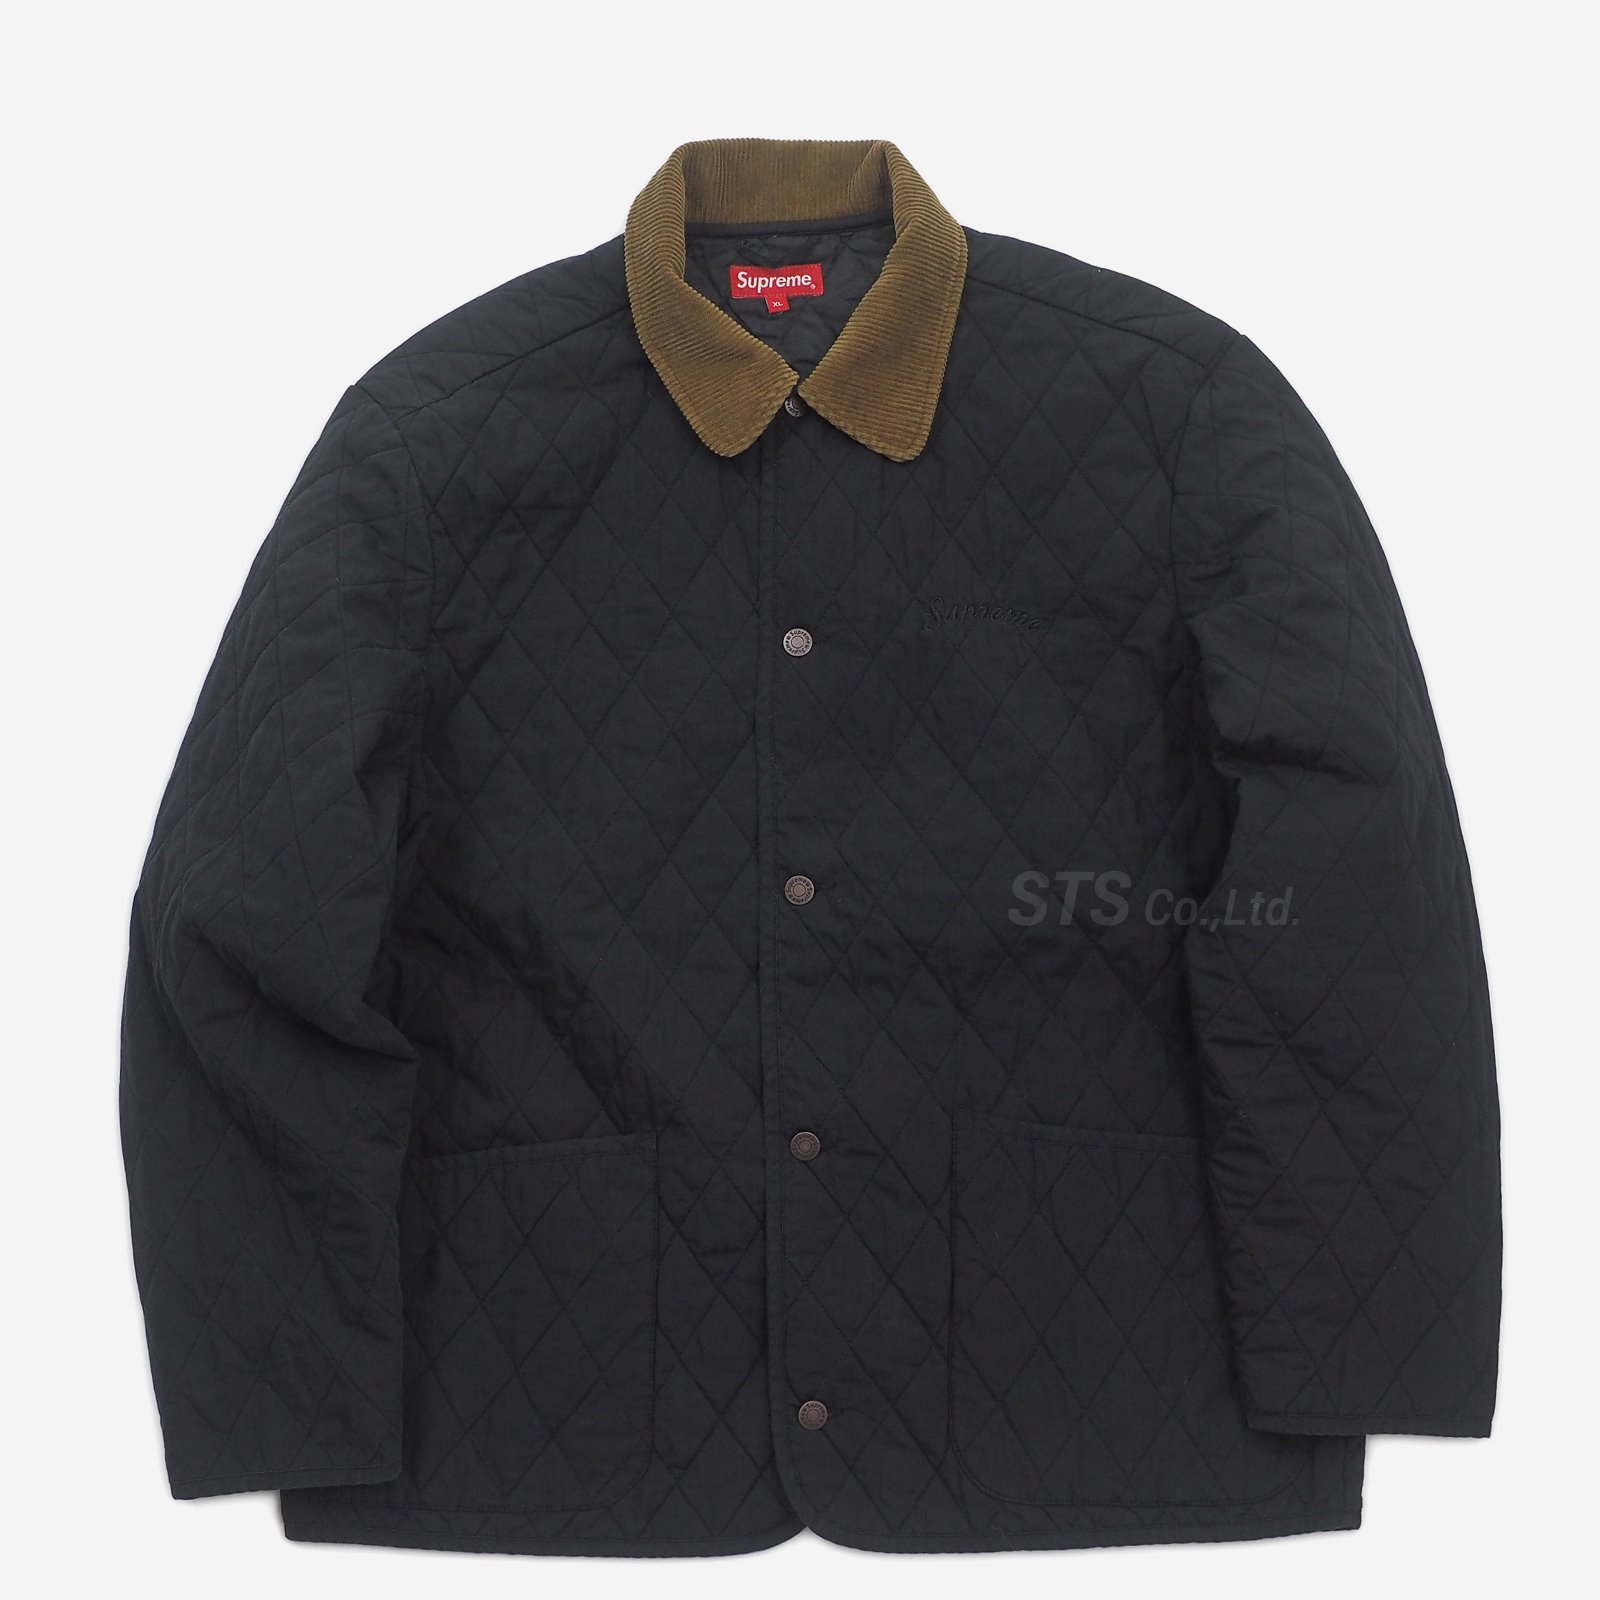 L Supreme Quilted Paisley Jacket 国内正規品